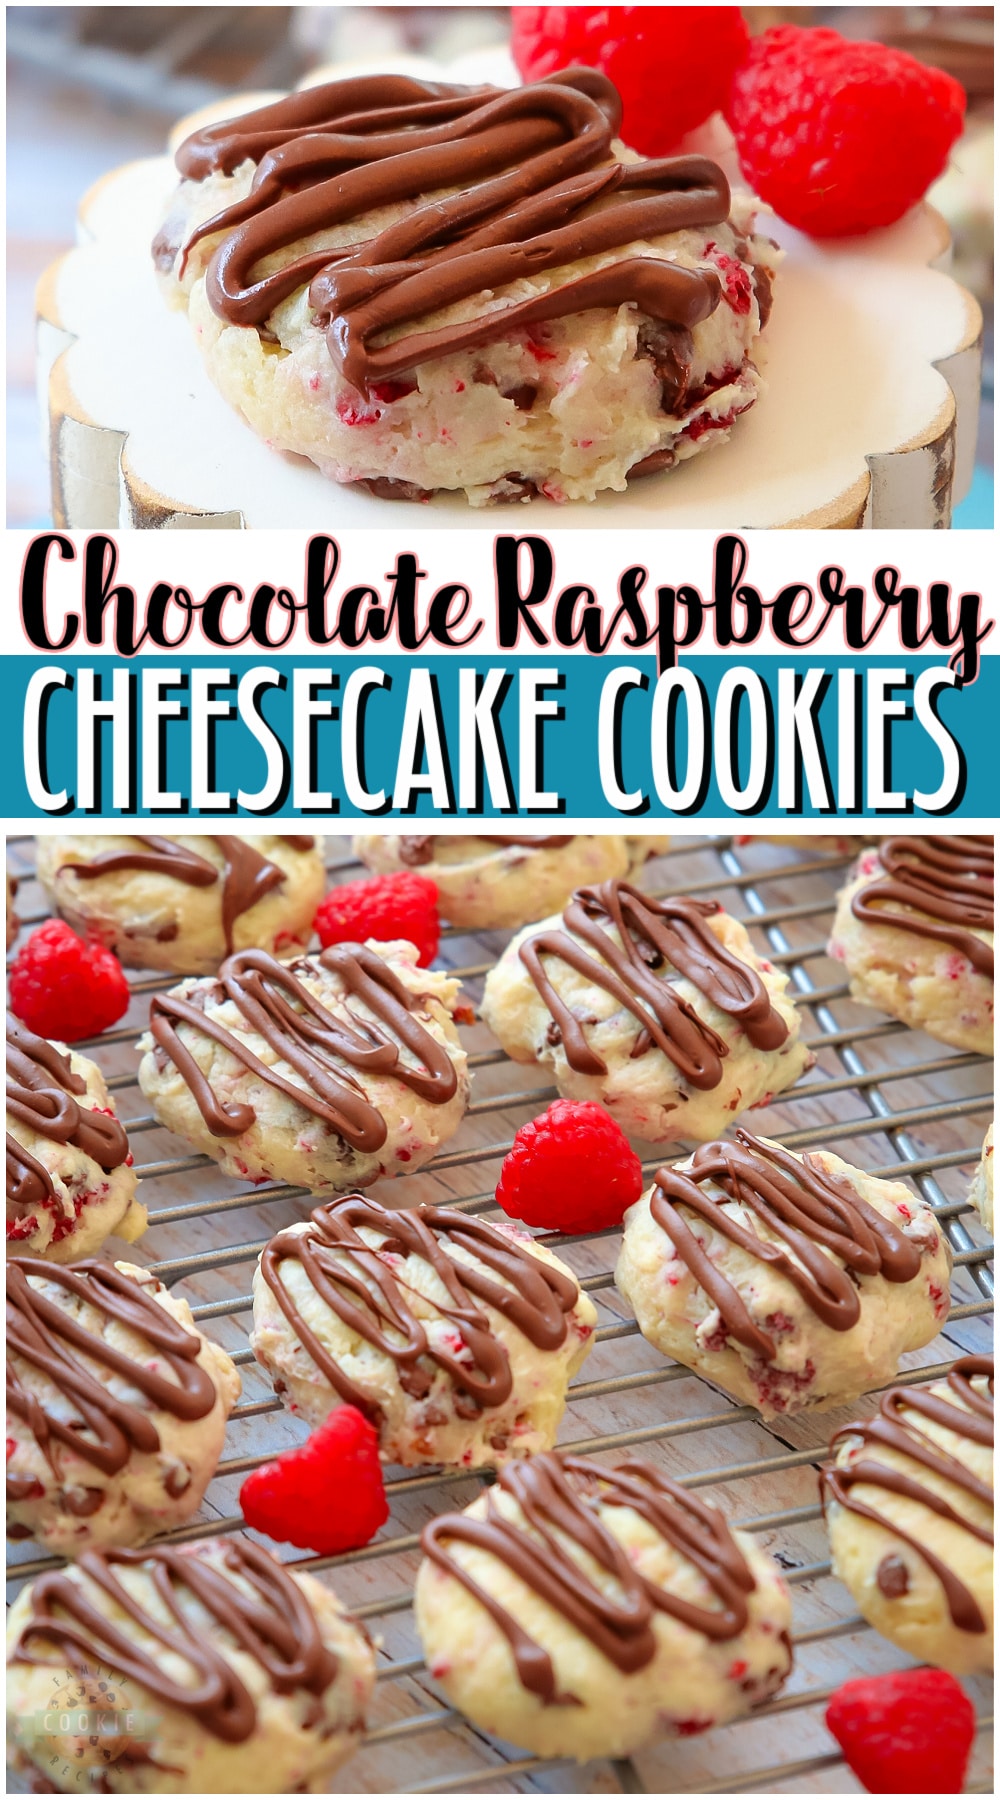 Chocolate Raspberry Cheesecake Cookies are indulgent cookies made with cream cheese, chocolate chips & raspberries! Soft cookies with bright raspberry cheesecake flavor that everyone loves!